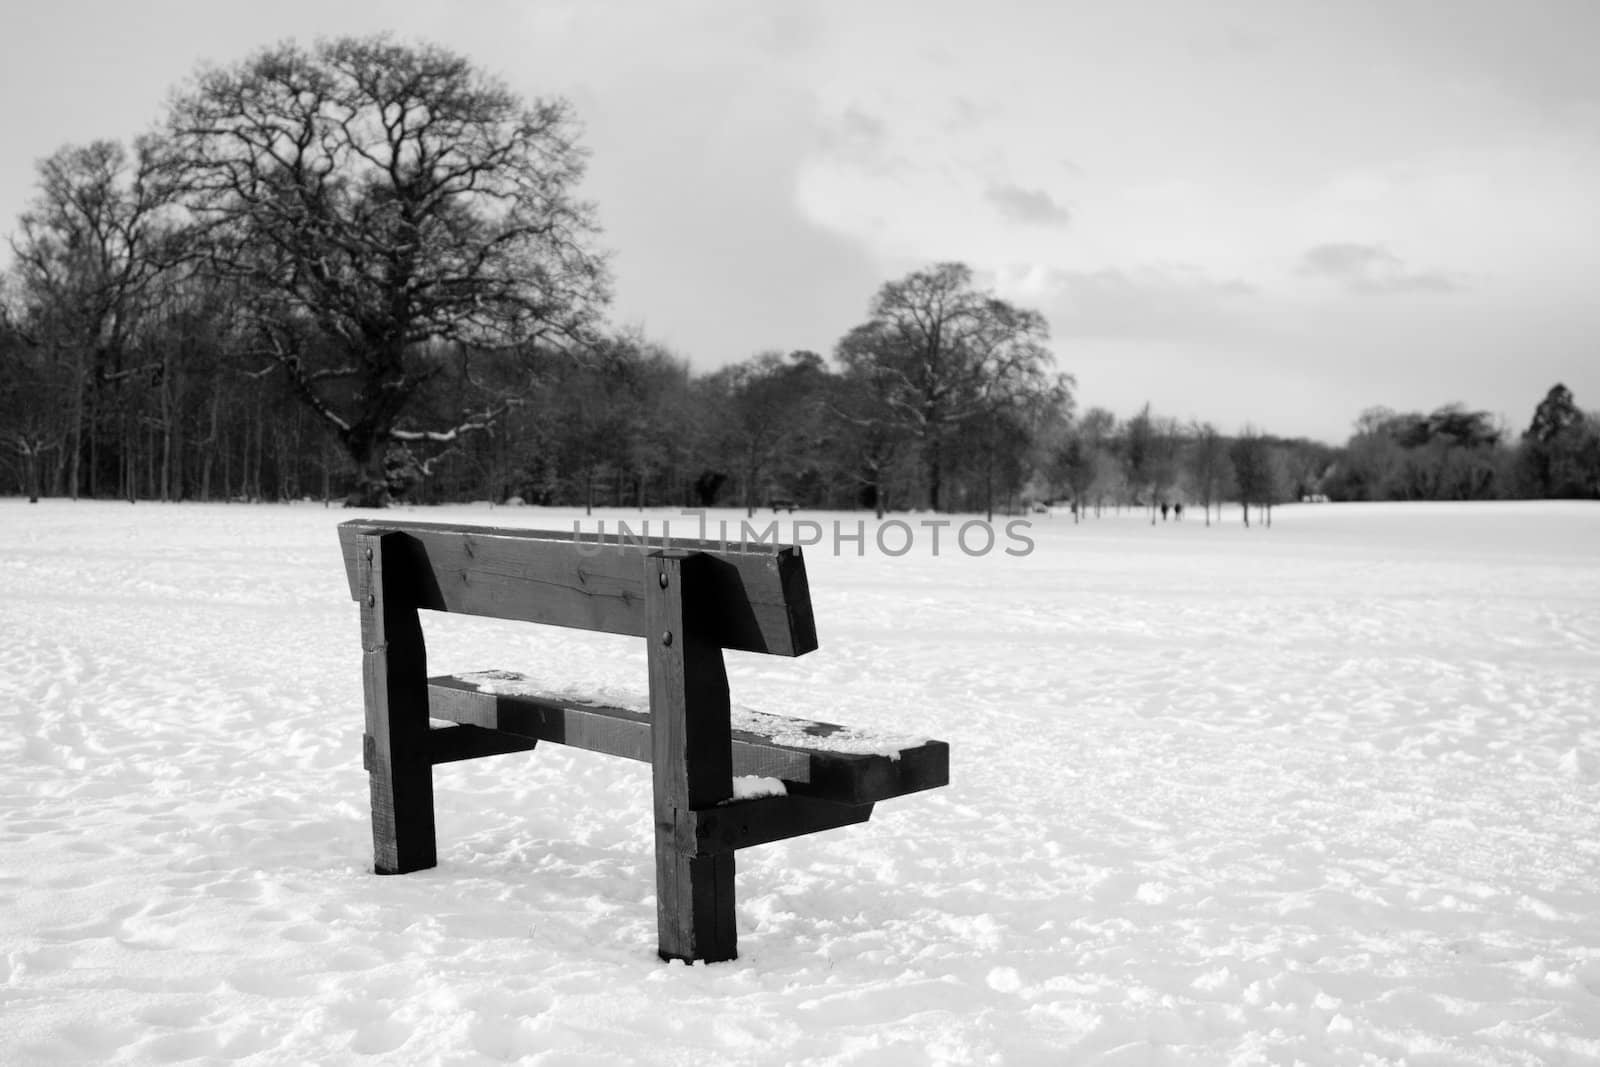 Abandonned bench in a snow filled field with trees in background